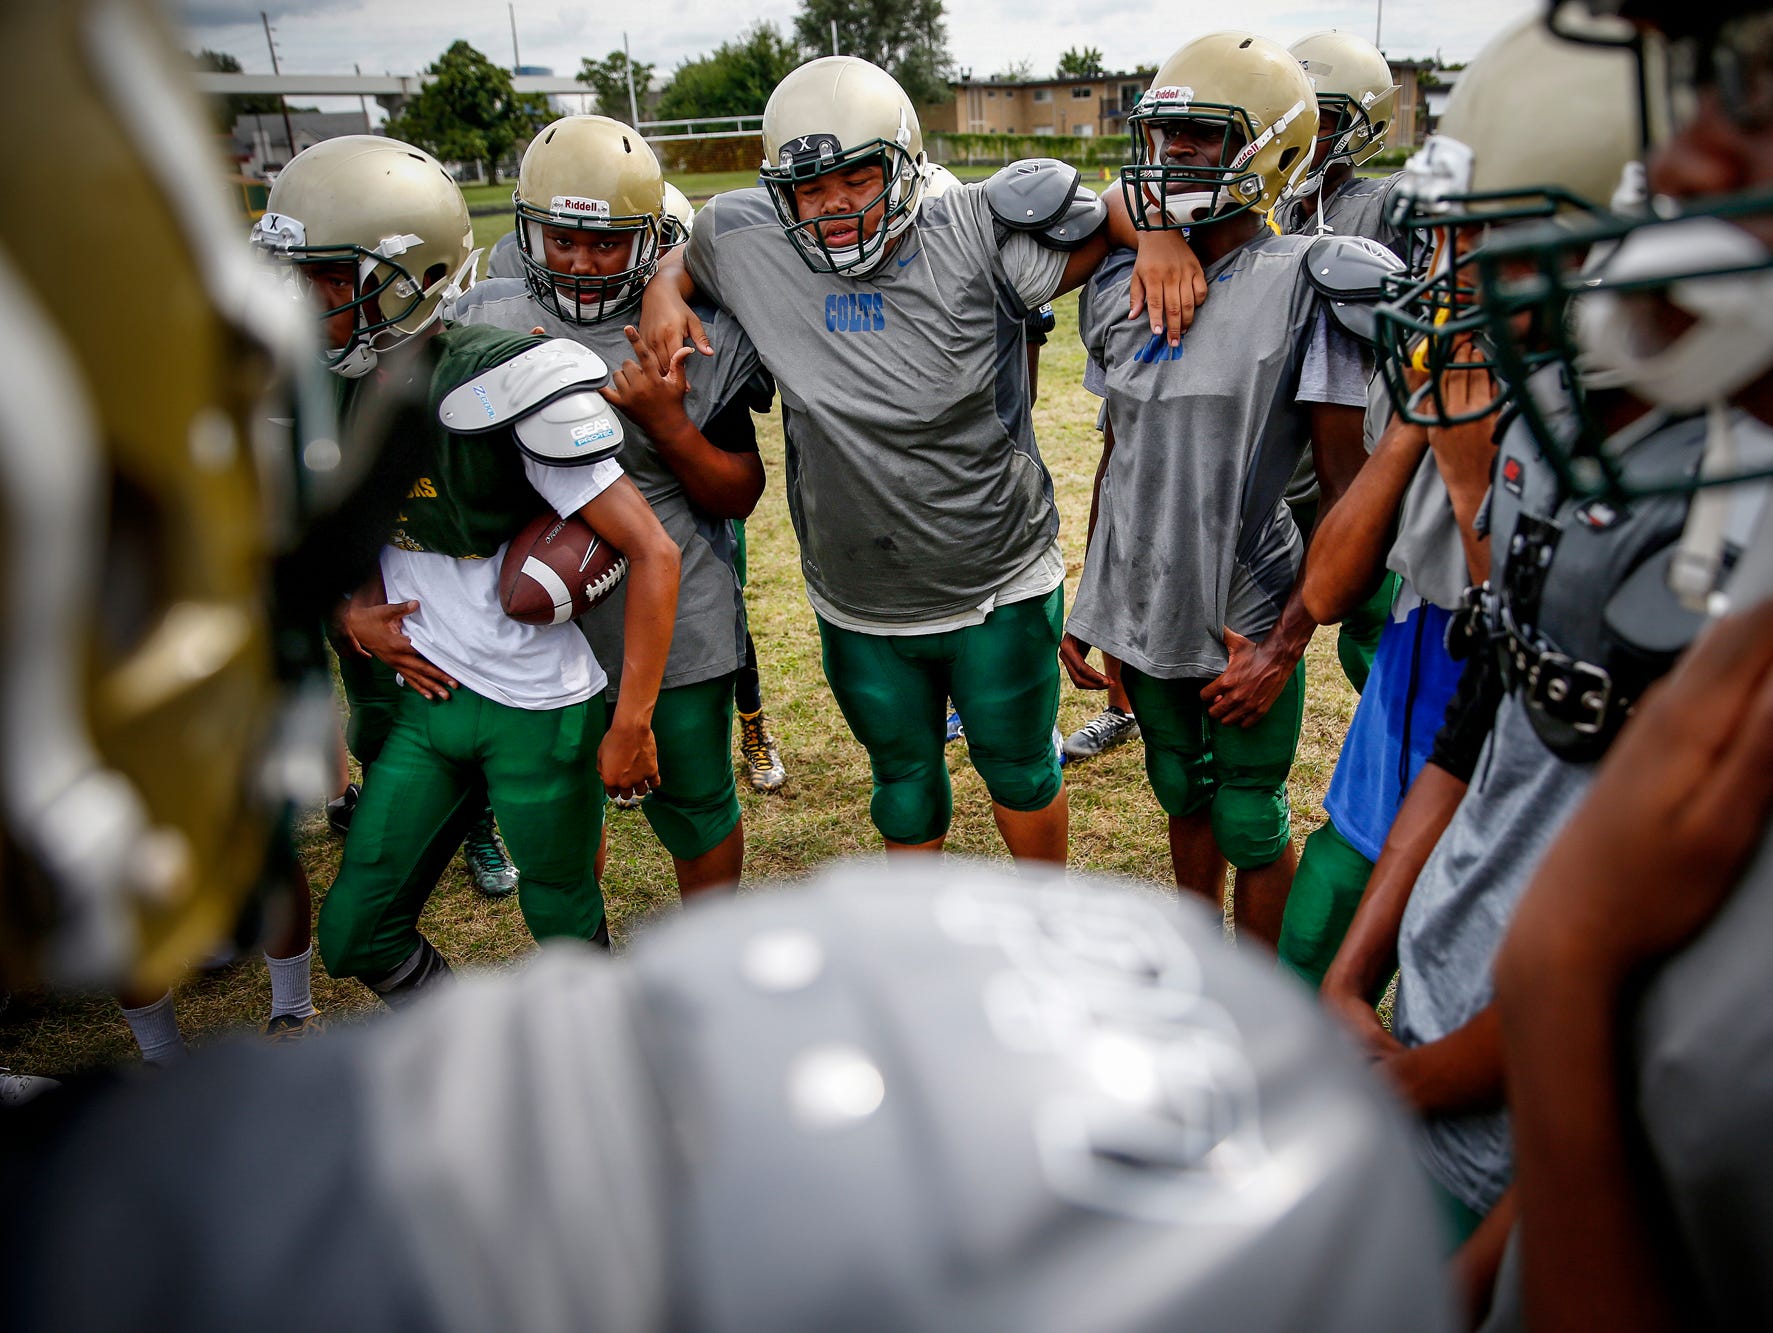 Exhausted Crispus Attucks players lean on each others shoulders during a team huddle during practice at Alonzo Watford Athletic Field on Aug. 17, 2016.